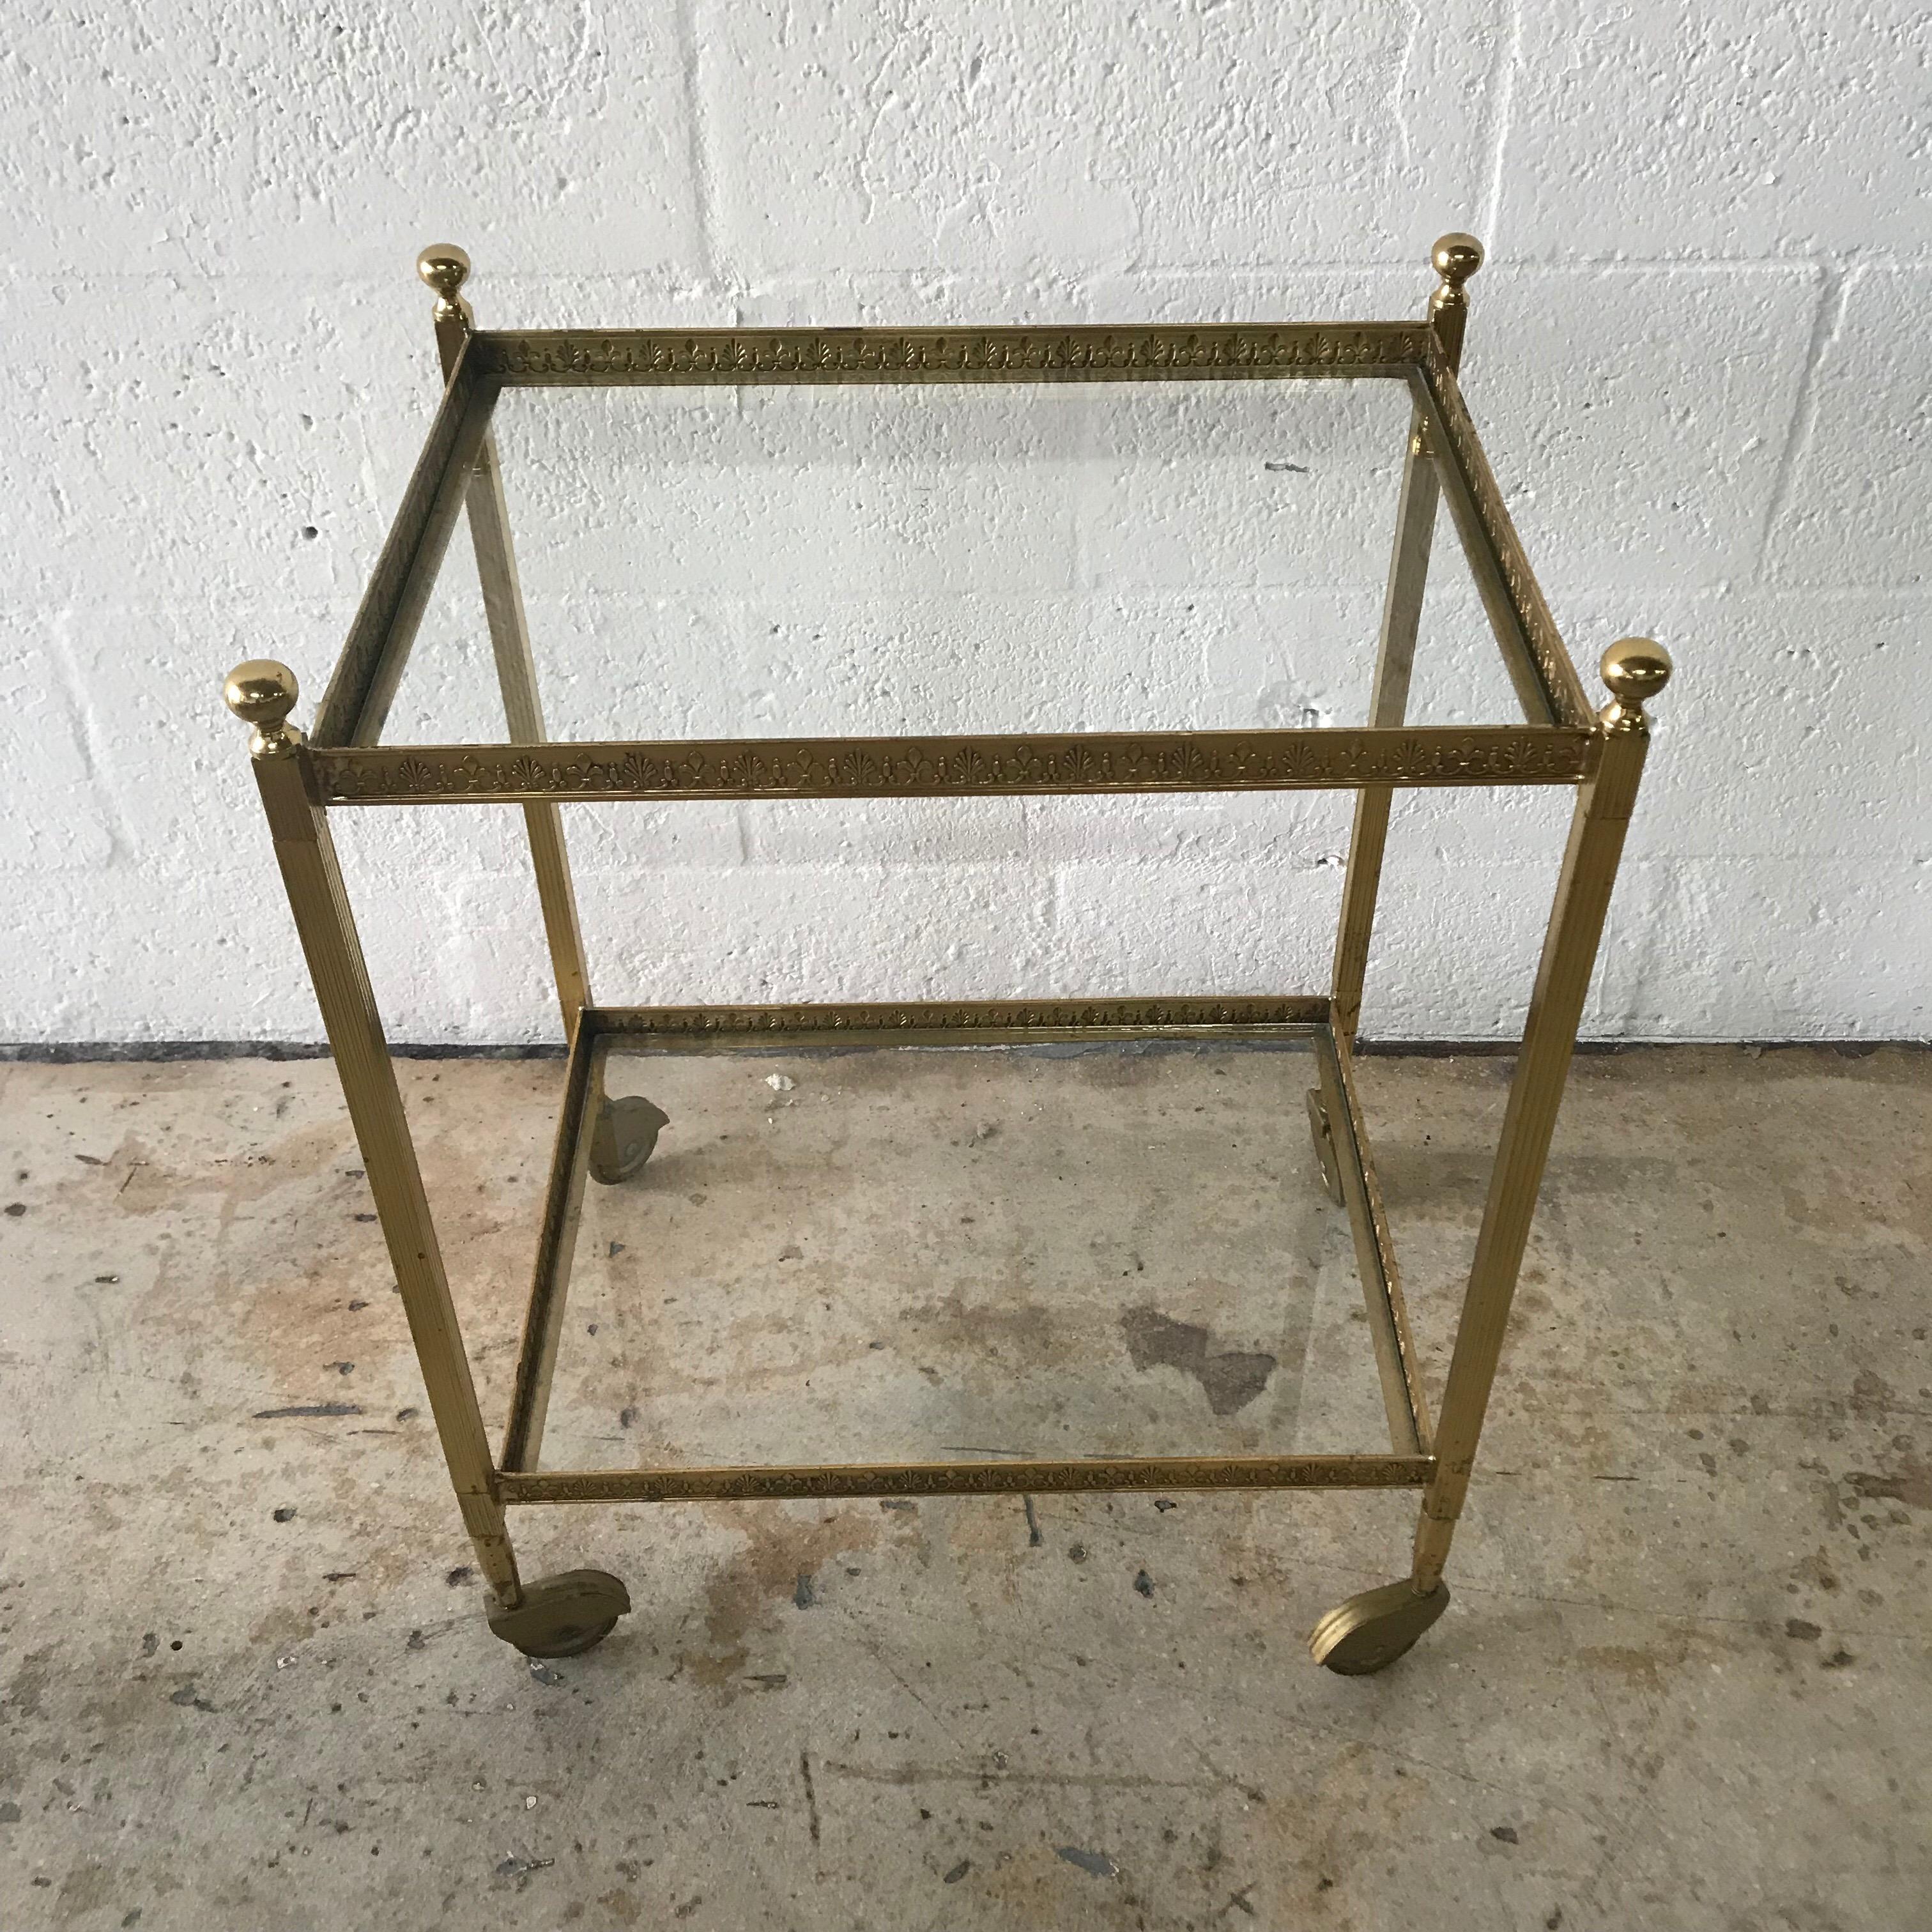 Two tier rolling occasional tables or cart rendered in brass and glass by Maison Jansen

One table is 25